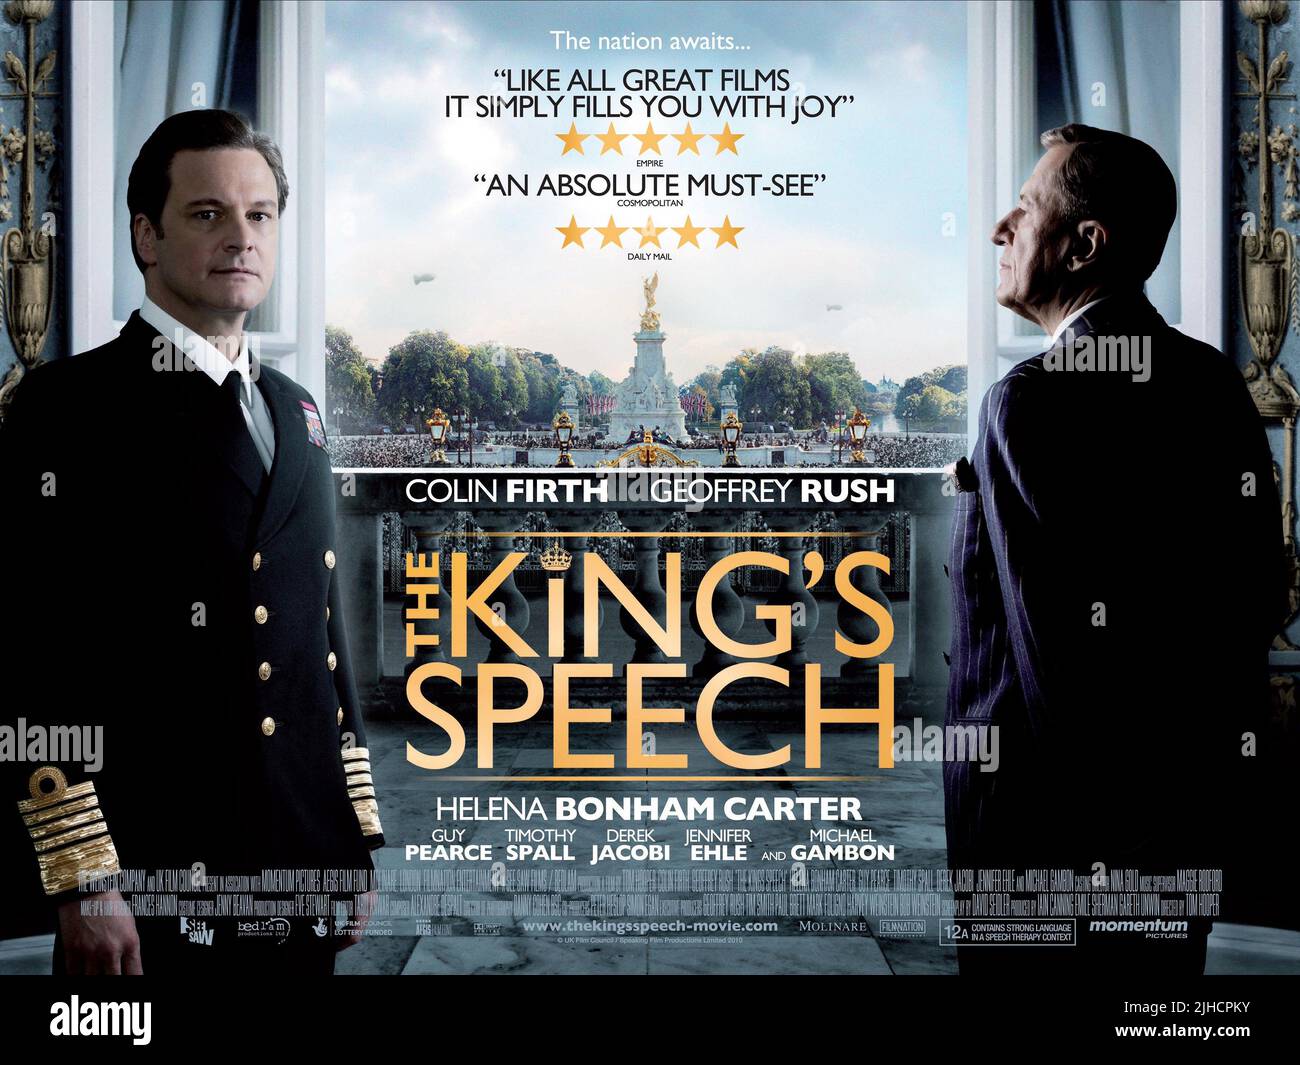 COLIN FIRTH, GEOFFREY RUSH POSTER, THE KING'S SPEECH, 2010 Stock Photo